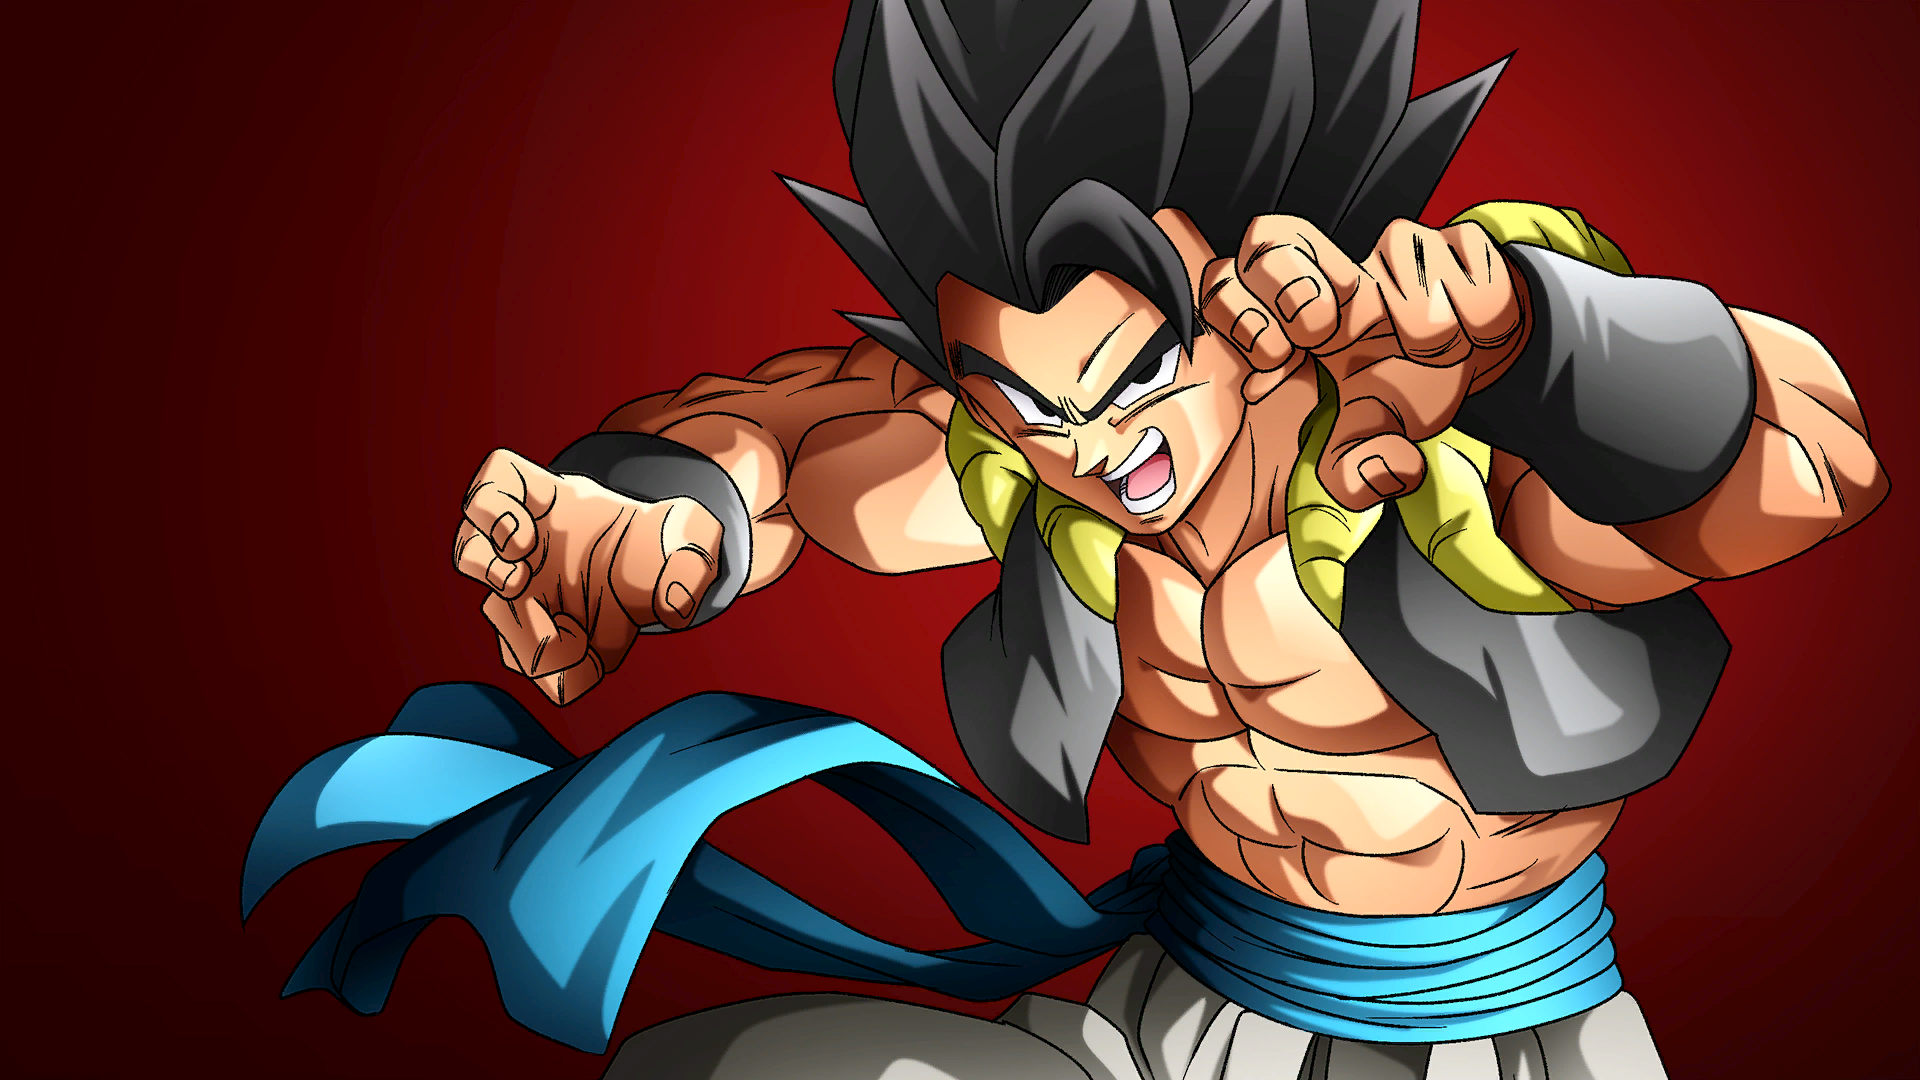 Anime 1920x1080 Dragon Ball Super Dragon Ball Z minimalism Gogeta muscles looking at viewer simple background anime men